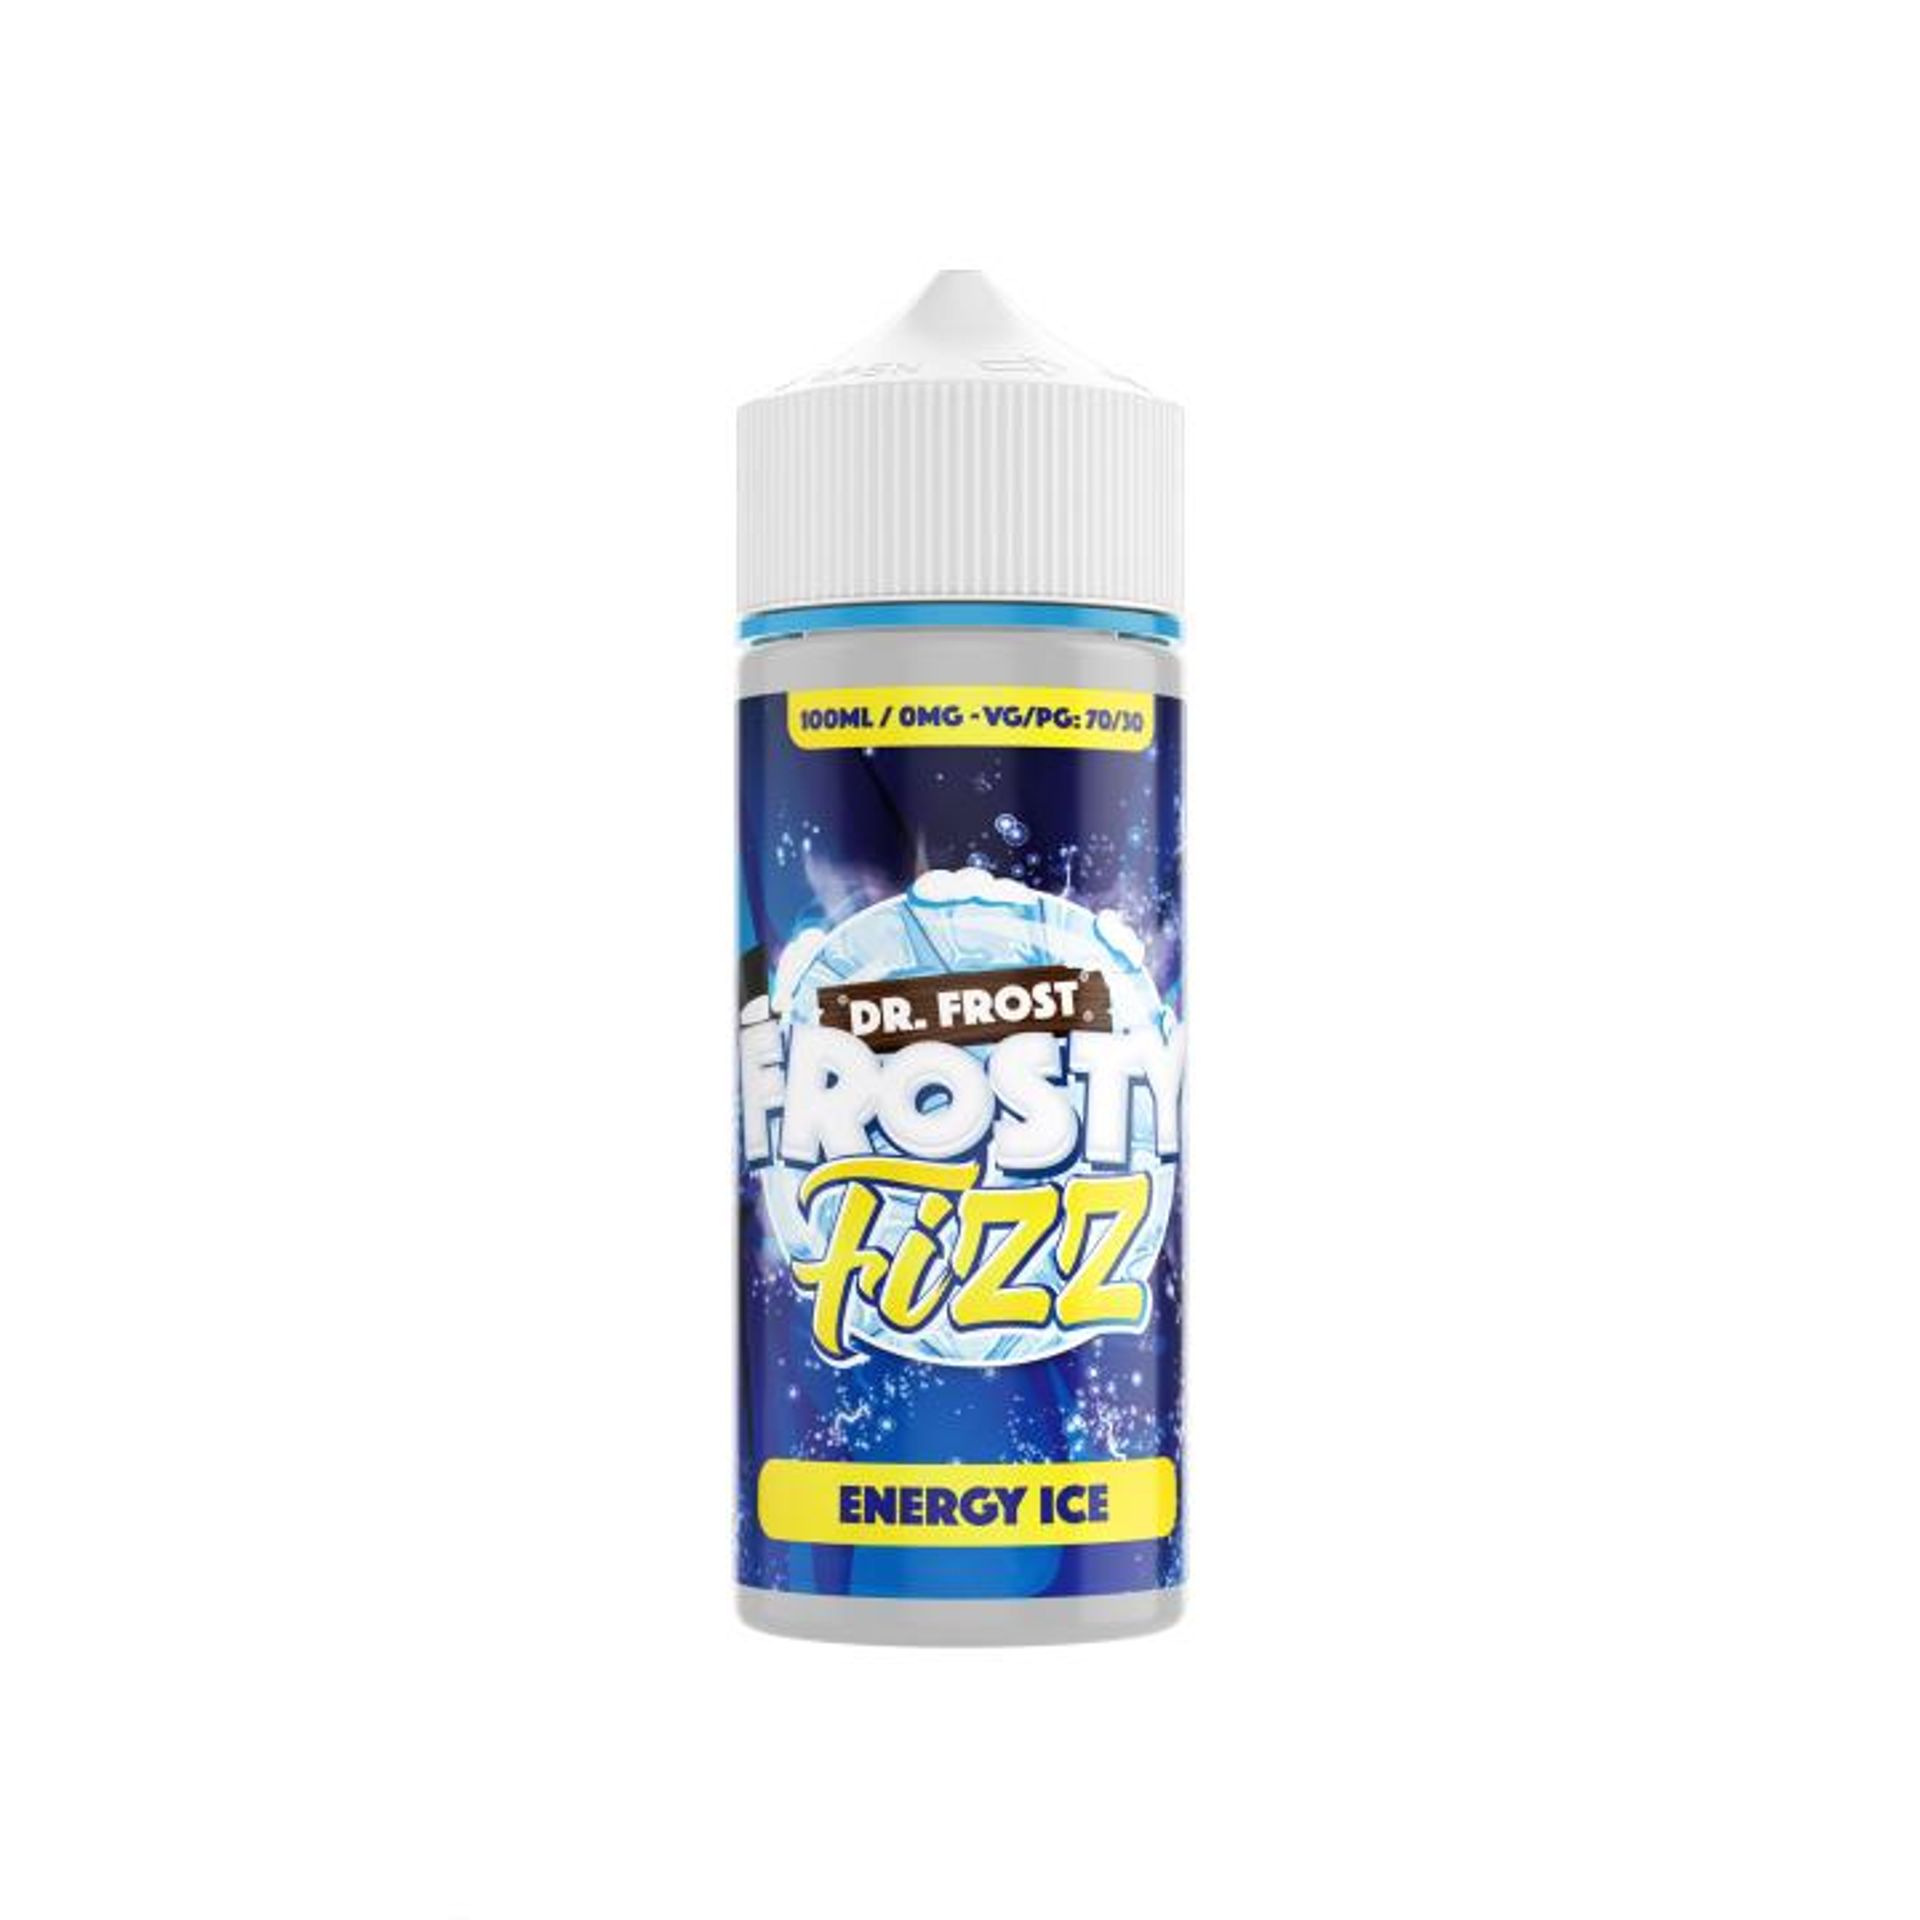 Image of Energy Ice Fizz by Dr Frost